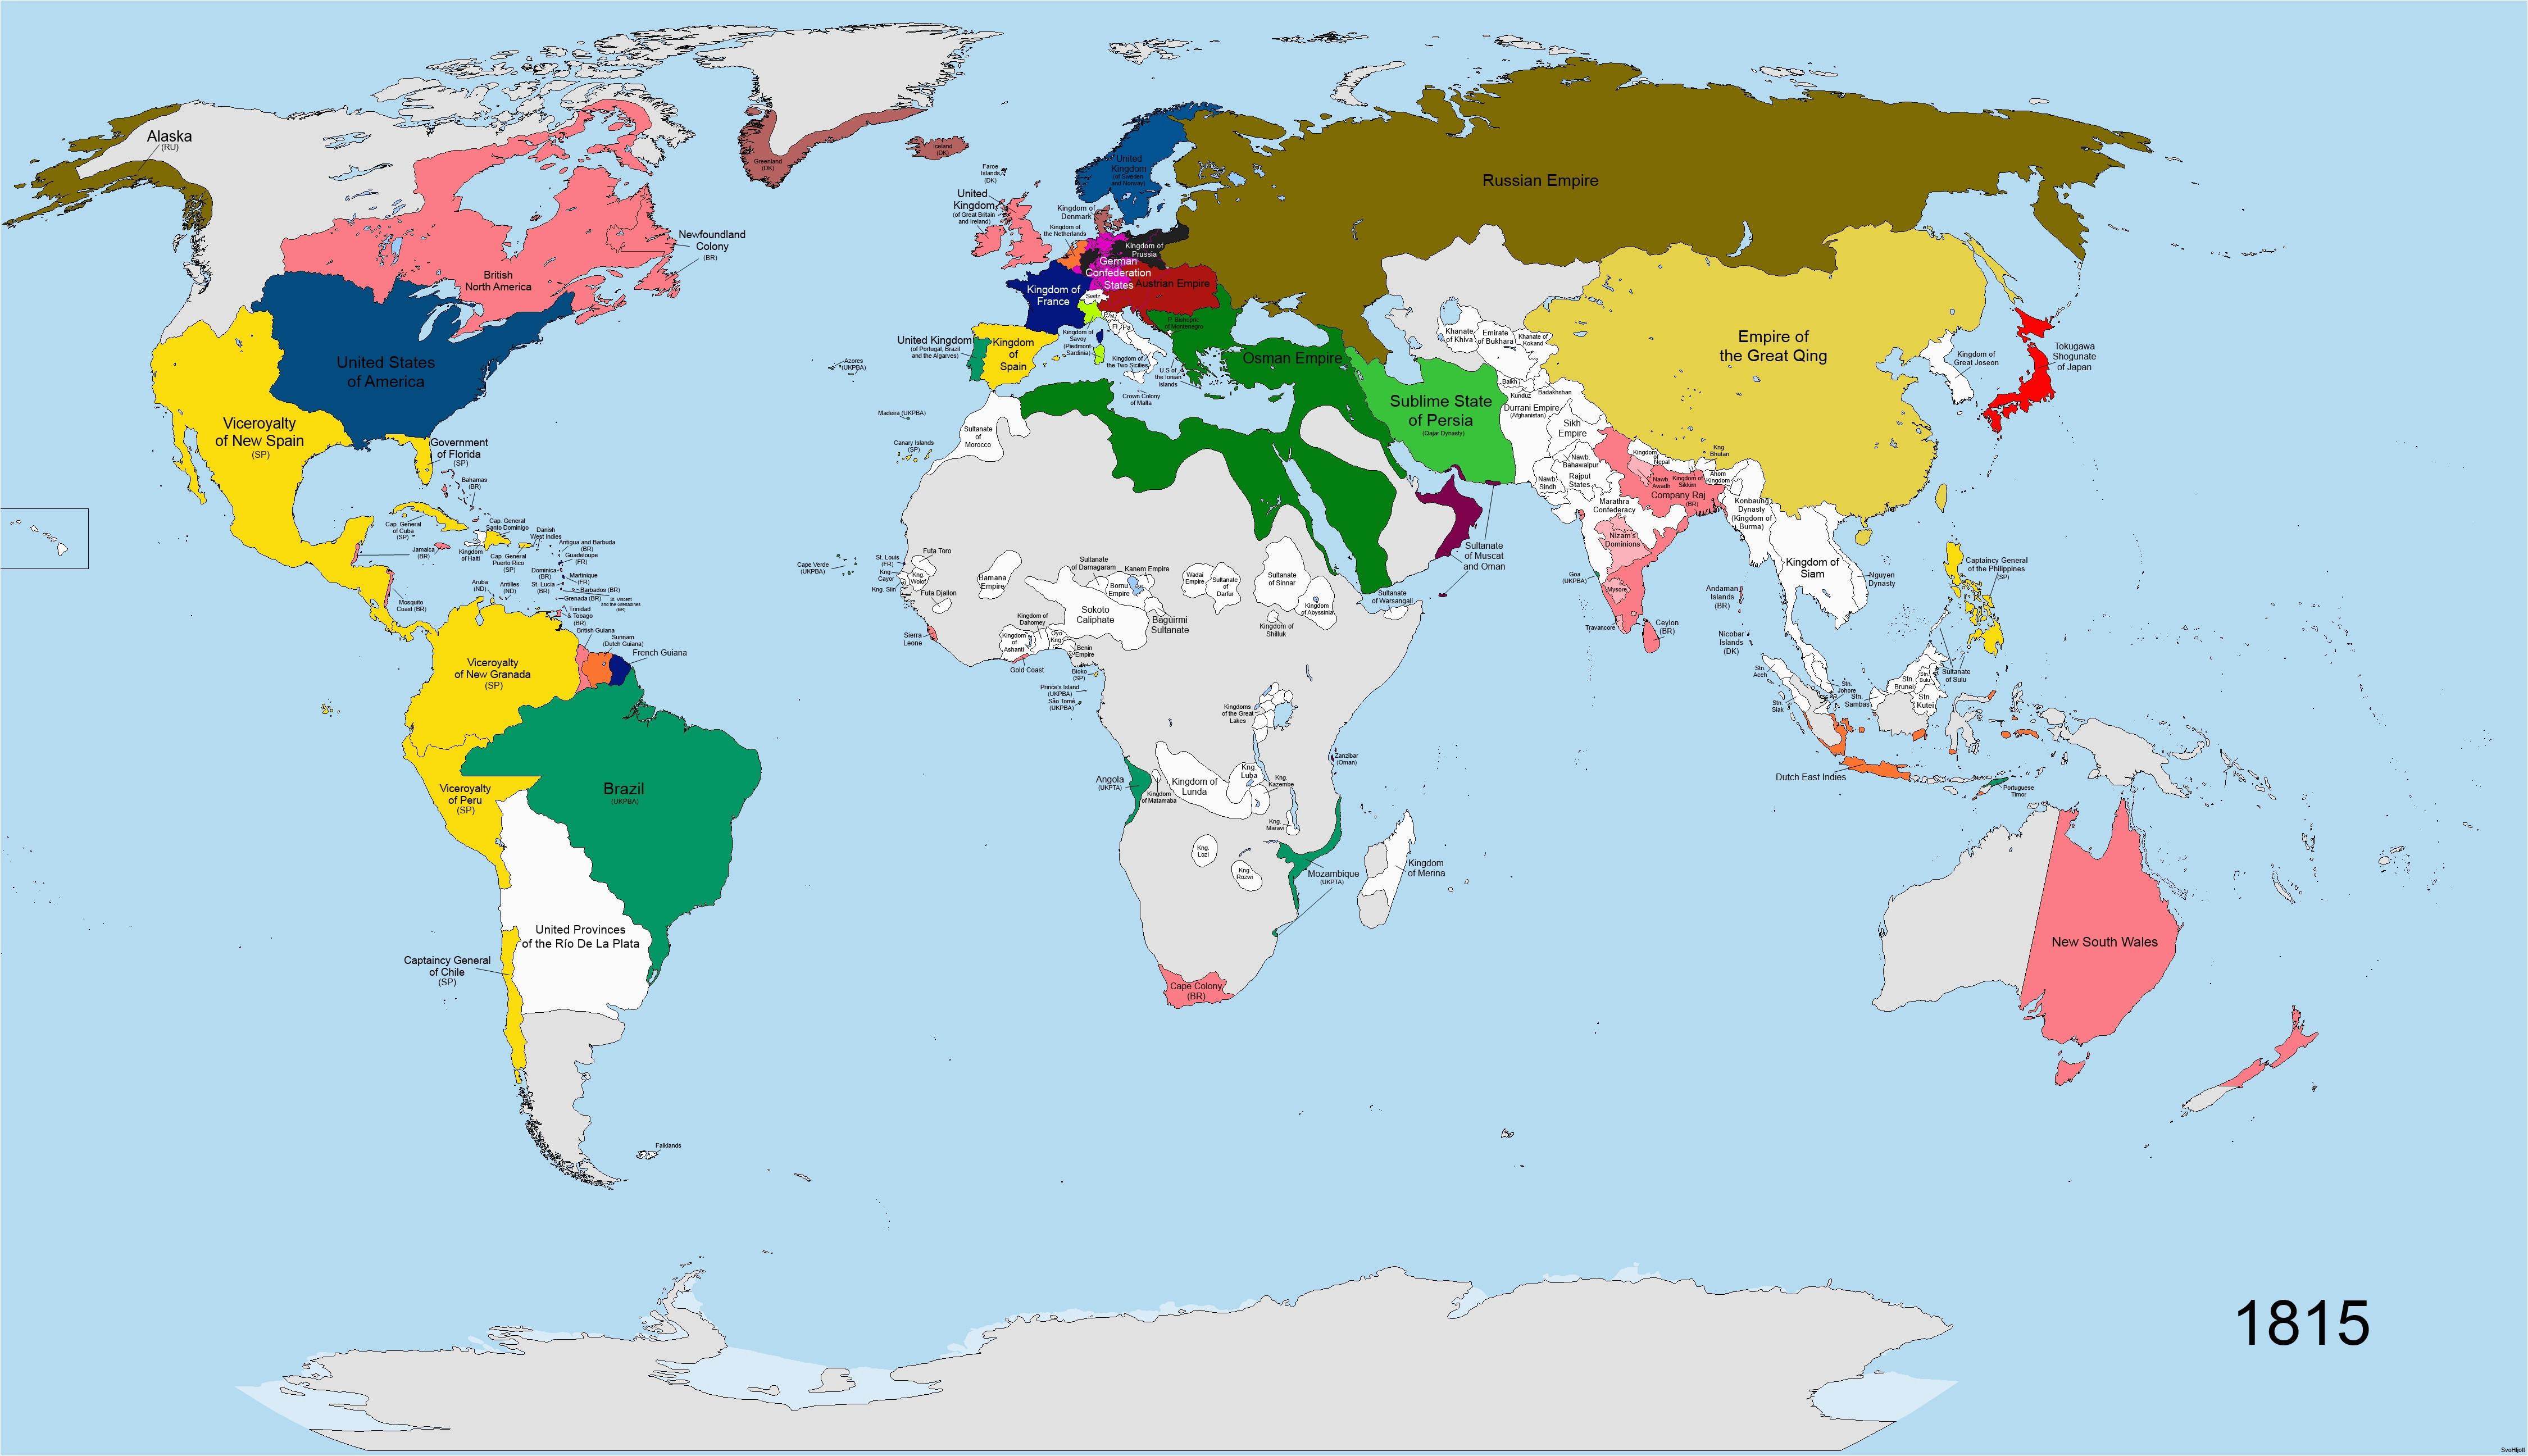 France On Map Of World File World Map 1815 Cov Jpg Wikimedia Commons